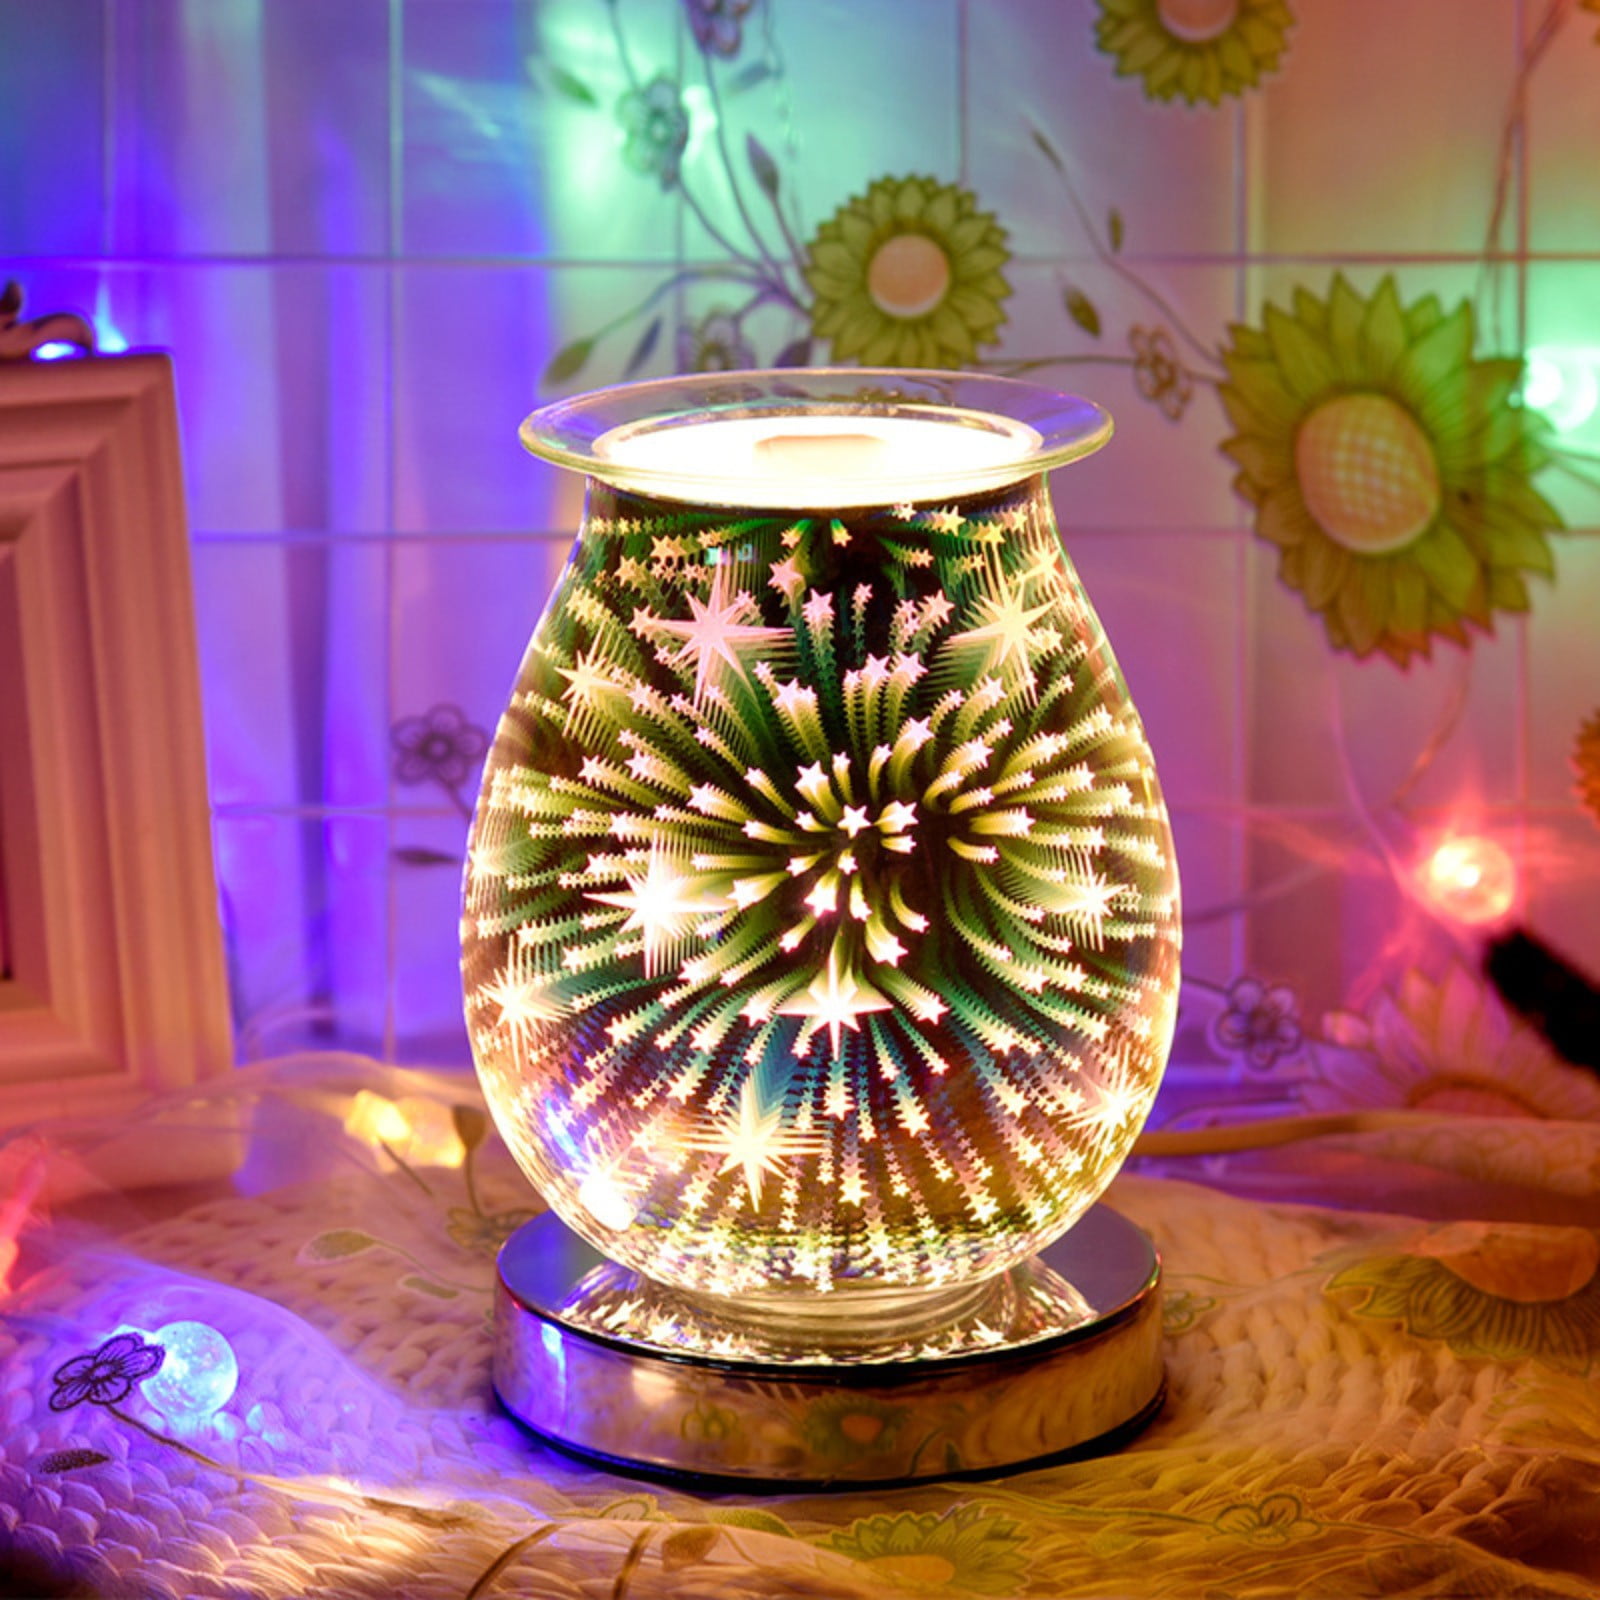 Pgeraug Decorate 3D Glass Electric Wax Melt Warmer Wax Burner Melter Warmer for Home Office Party Light-Up Decoration A